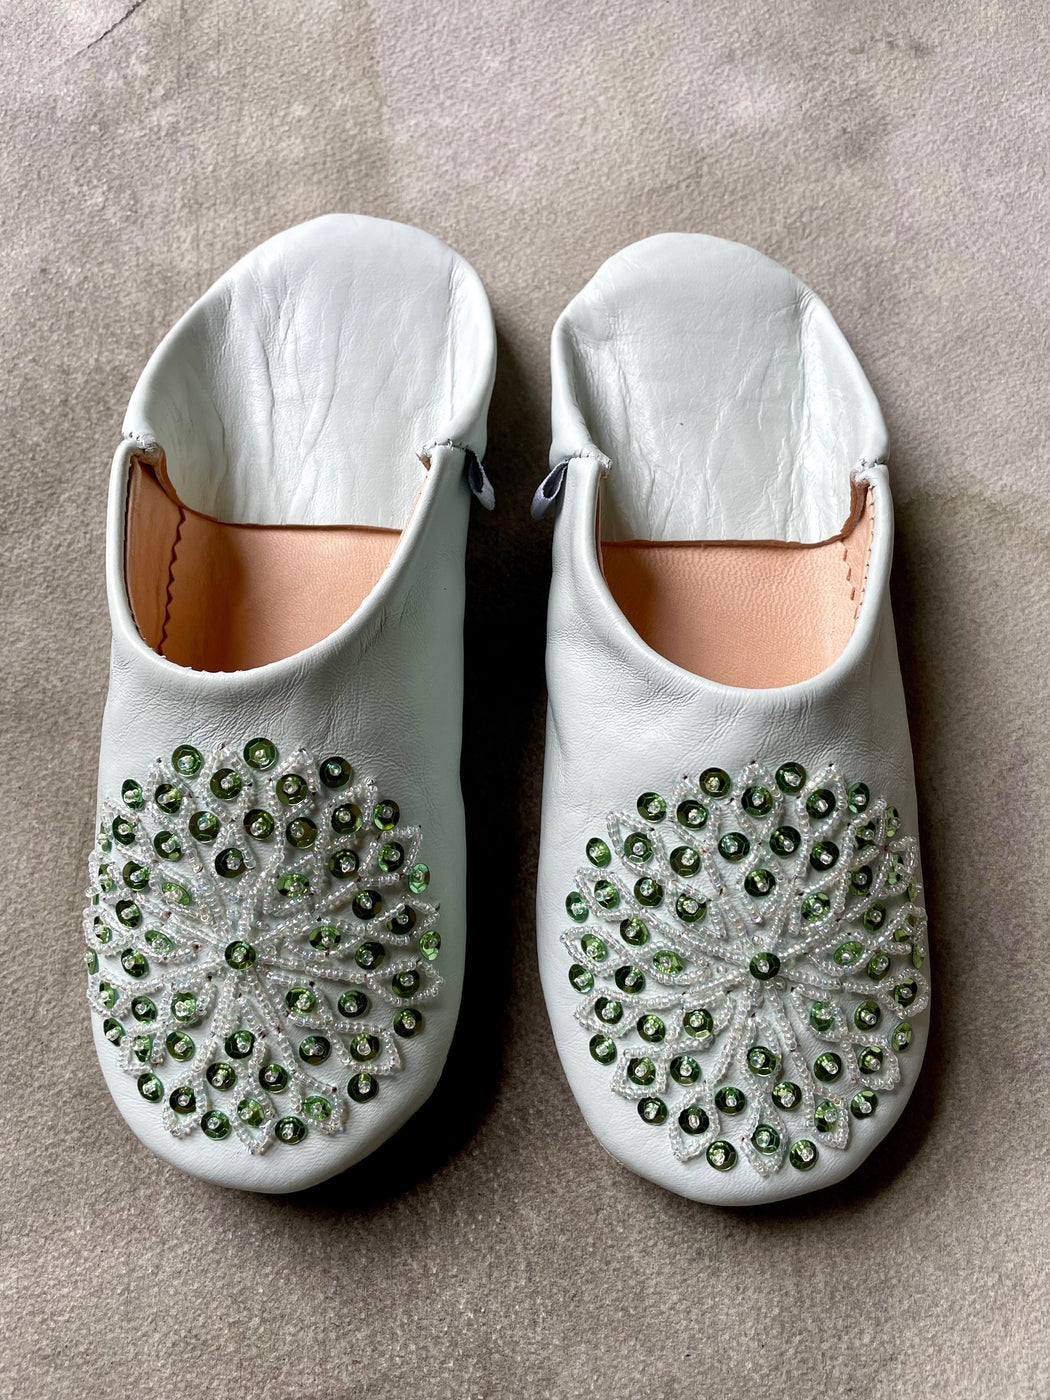 Beaded Moroccan Slippers - Pale Blue